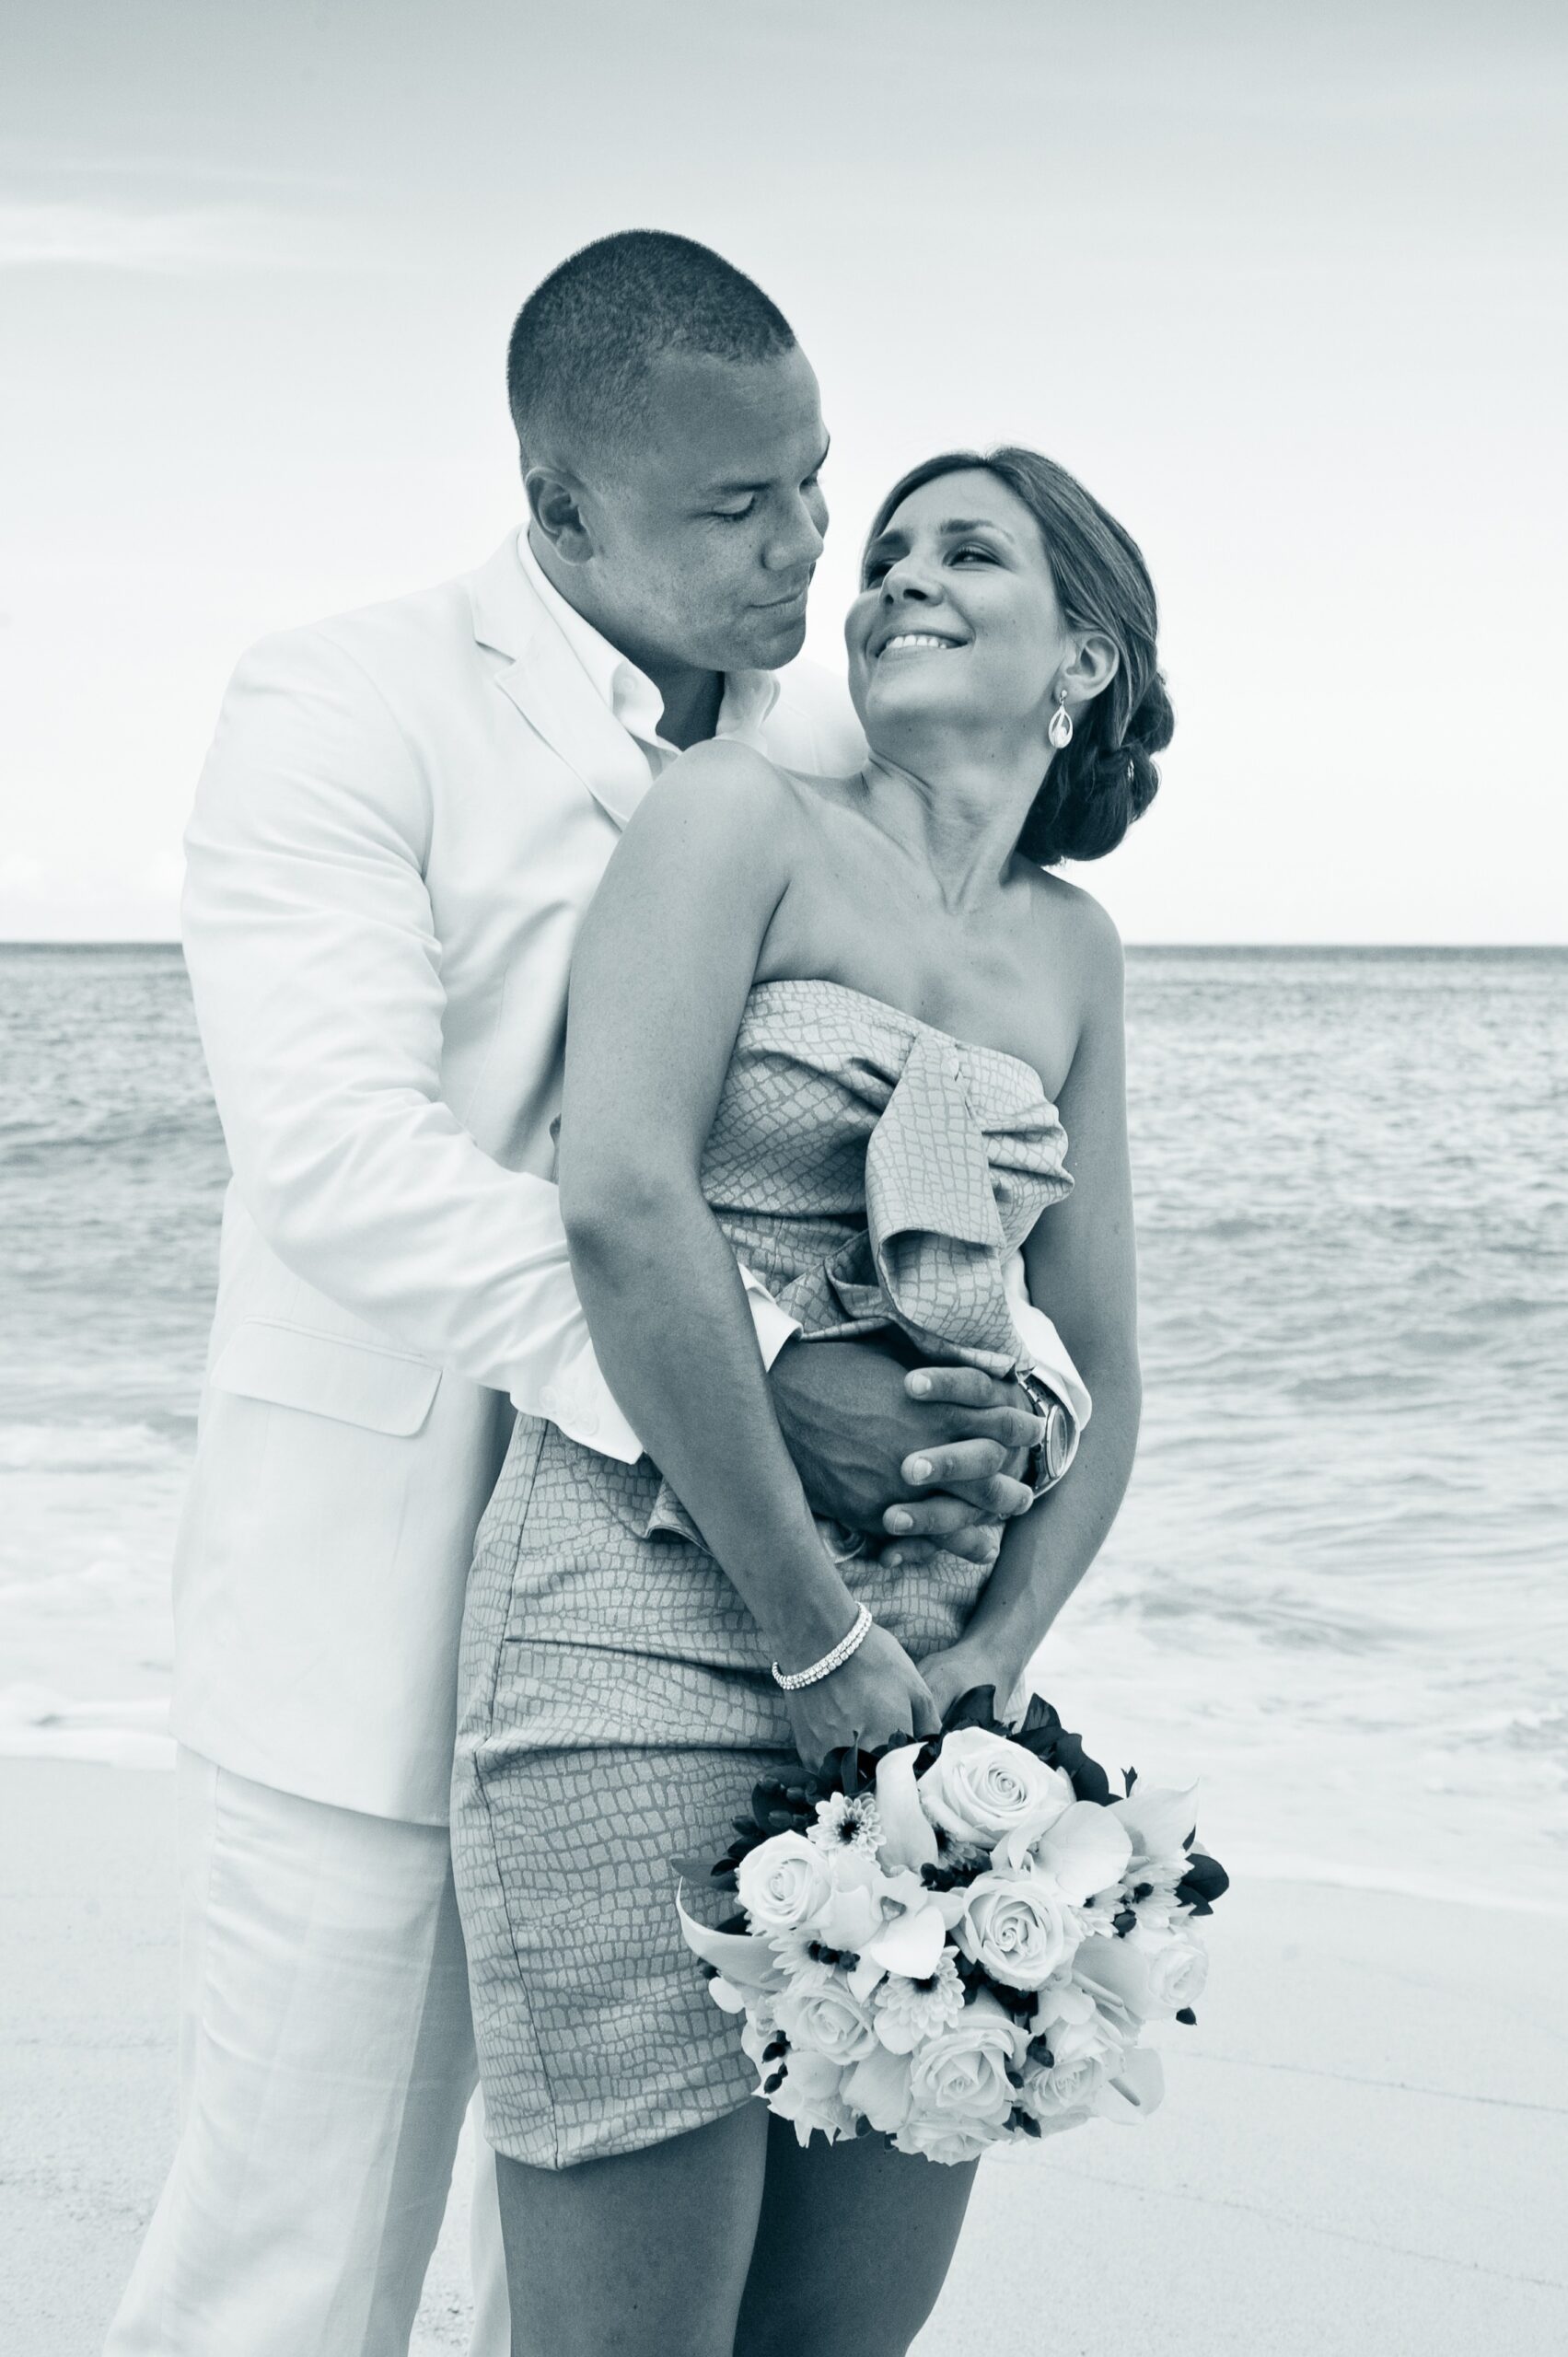 Barbados Destination Wedding Planners | Caribbean Event Planners | CWC Events